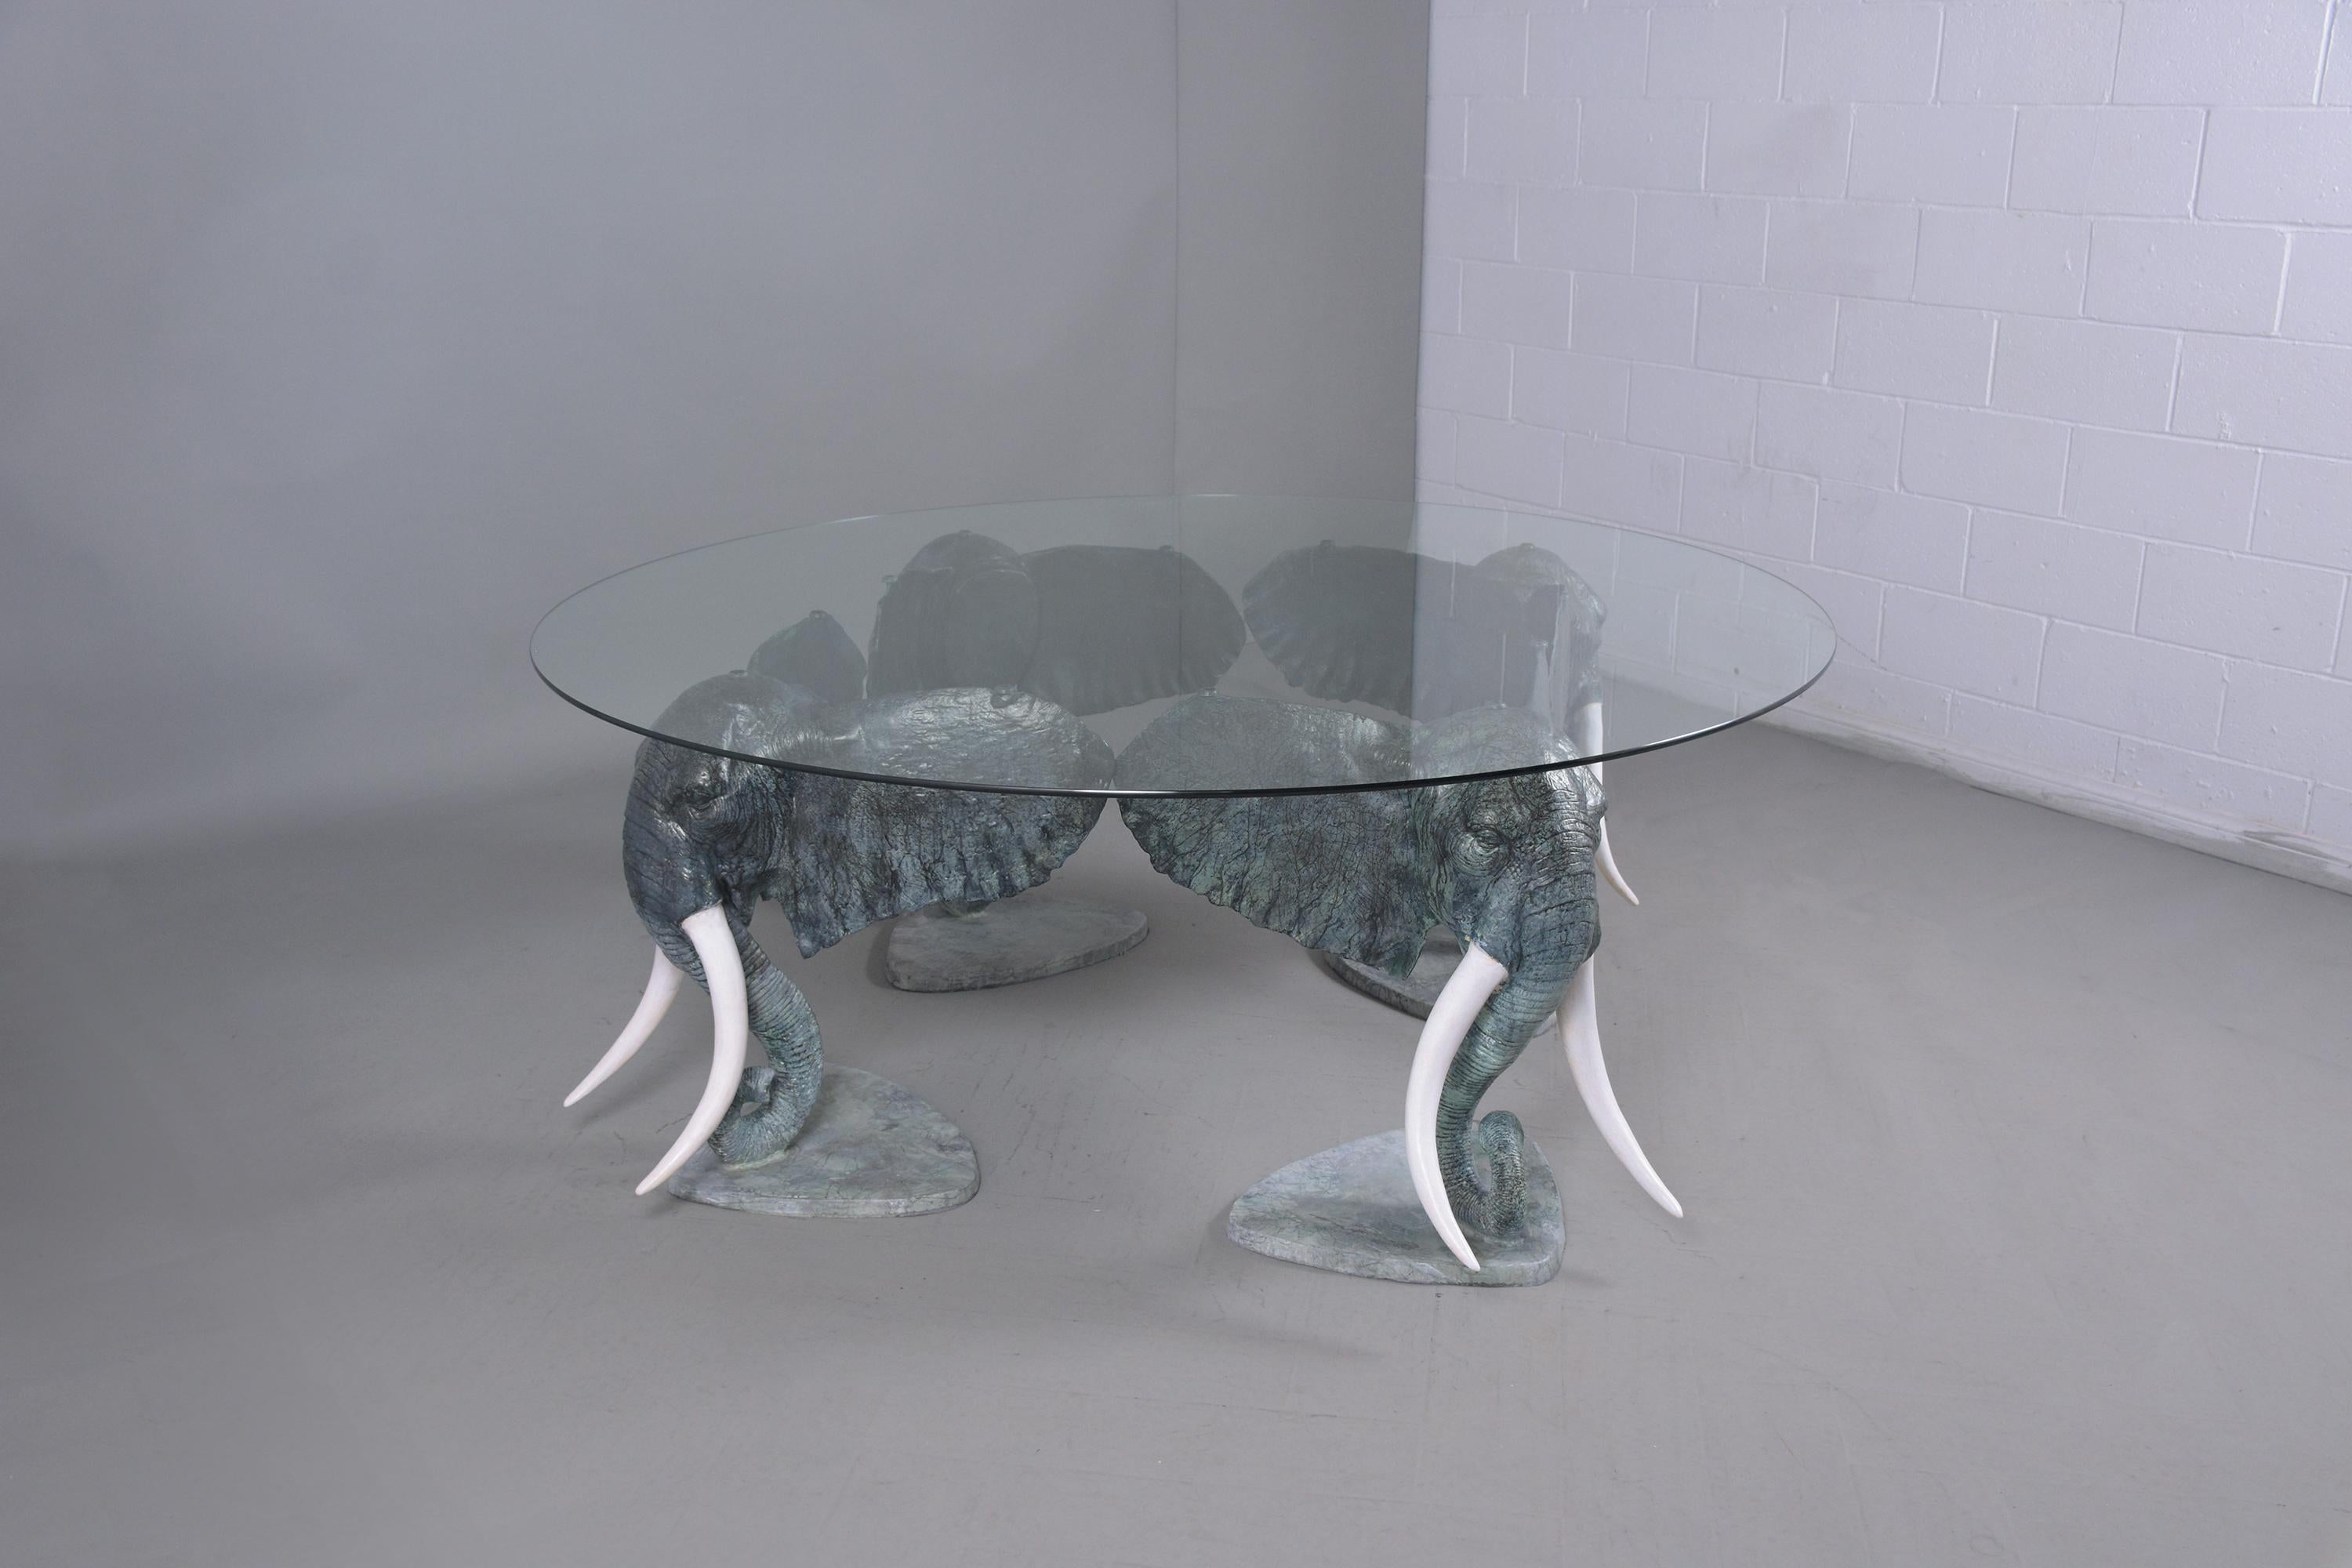 Hand-Crafted Monumental Sculpture Center Table